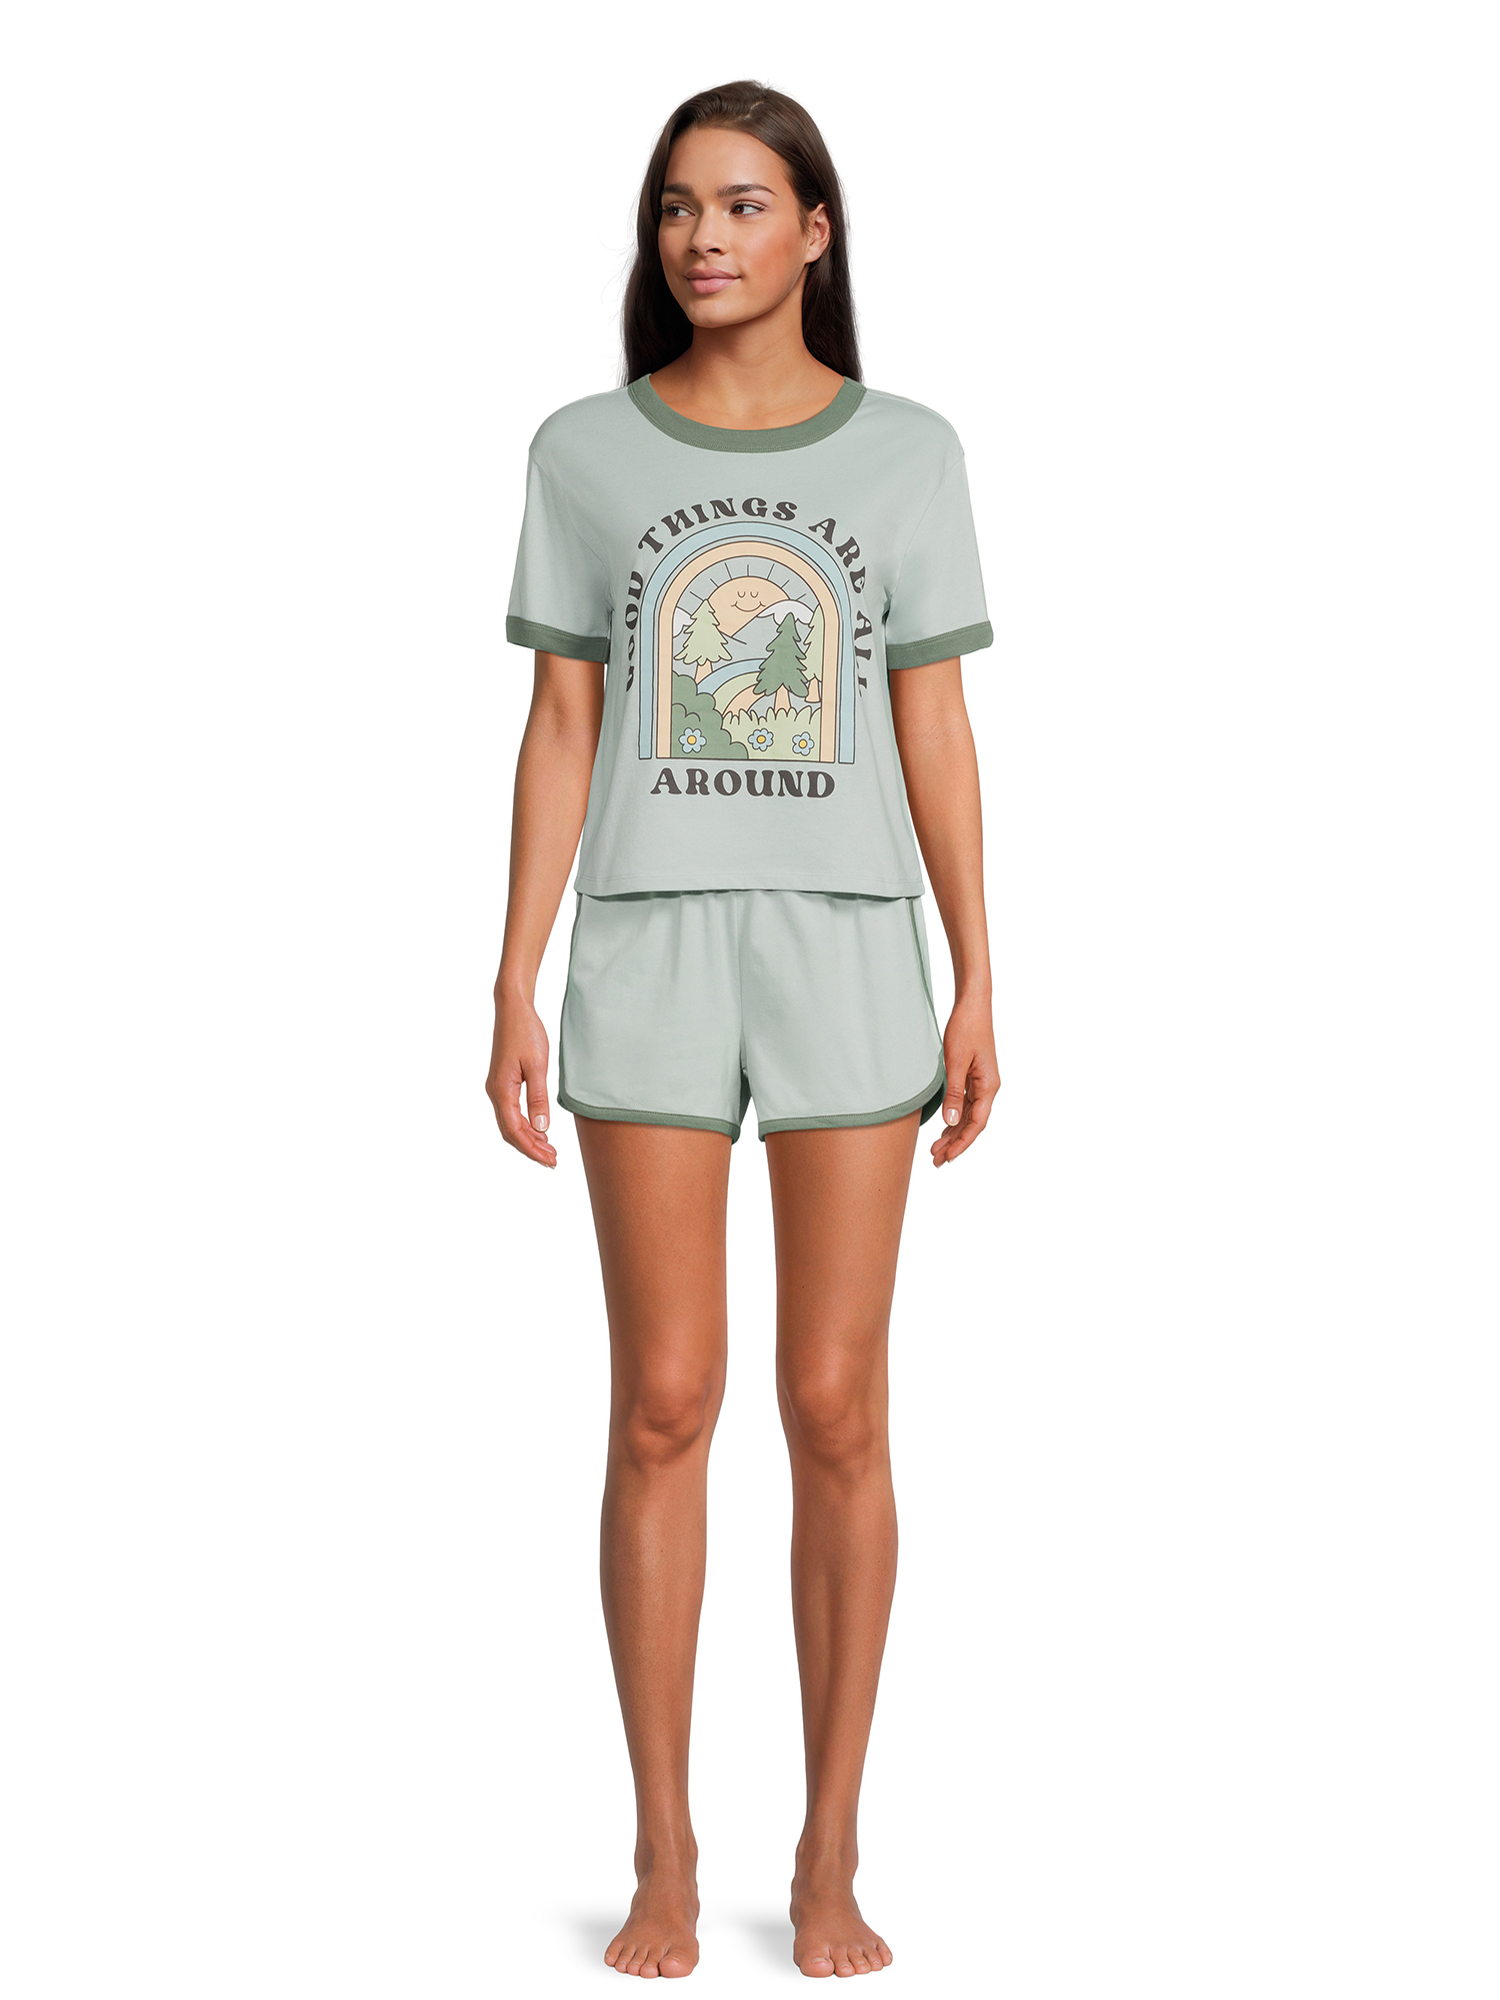 Good Things Women's Ringer Tee and Short Sleep Set, 2-Piece - image 5 of 5